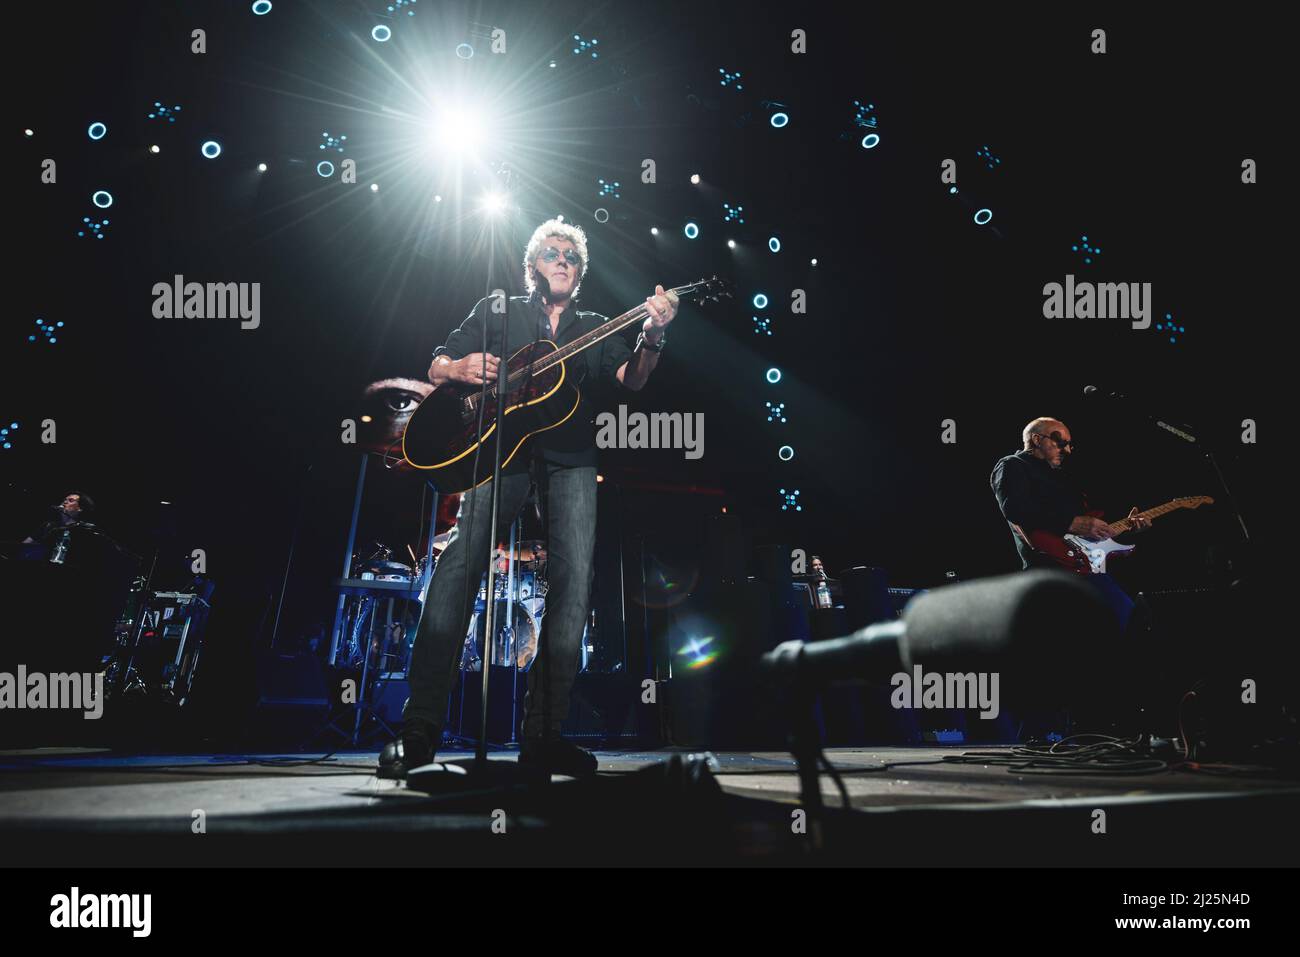 ITALY, BOLOGNA, UNIPOL ARENA 2016: Roger Daltrey and Pete Townshend, of the British rock band “The Who”, performing live on stage for the “Back to the Who” European tour Stock Photo